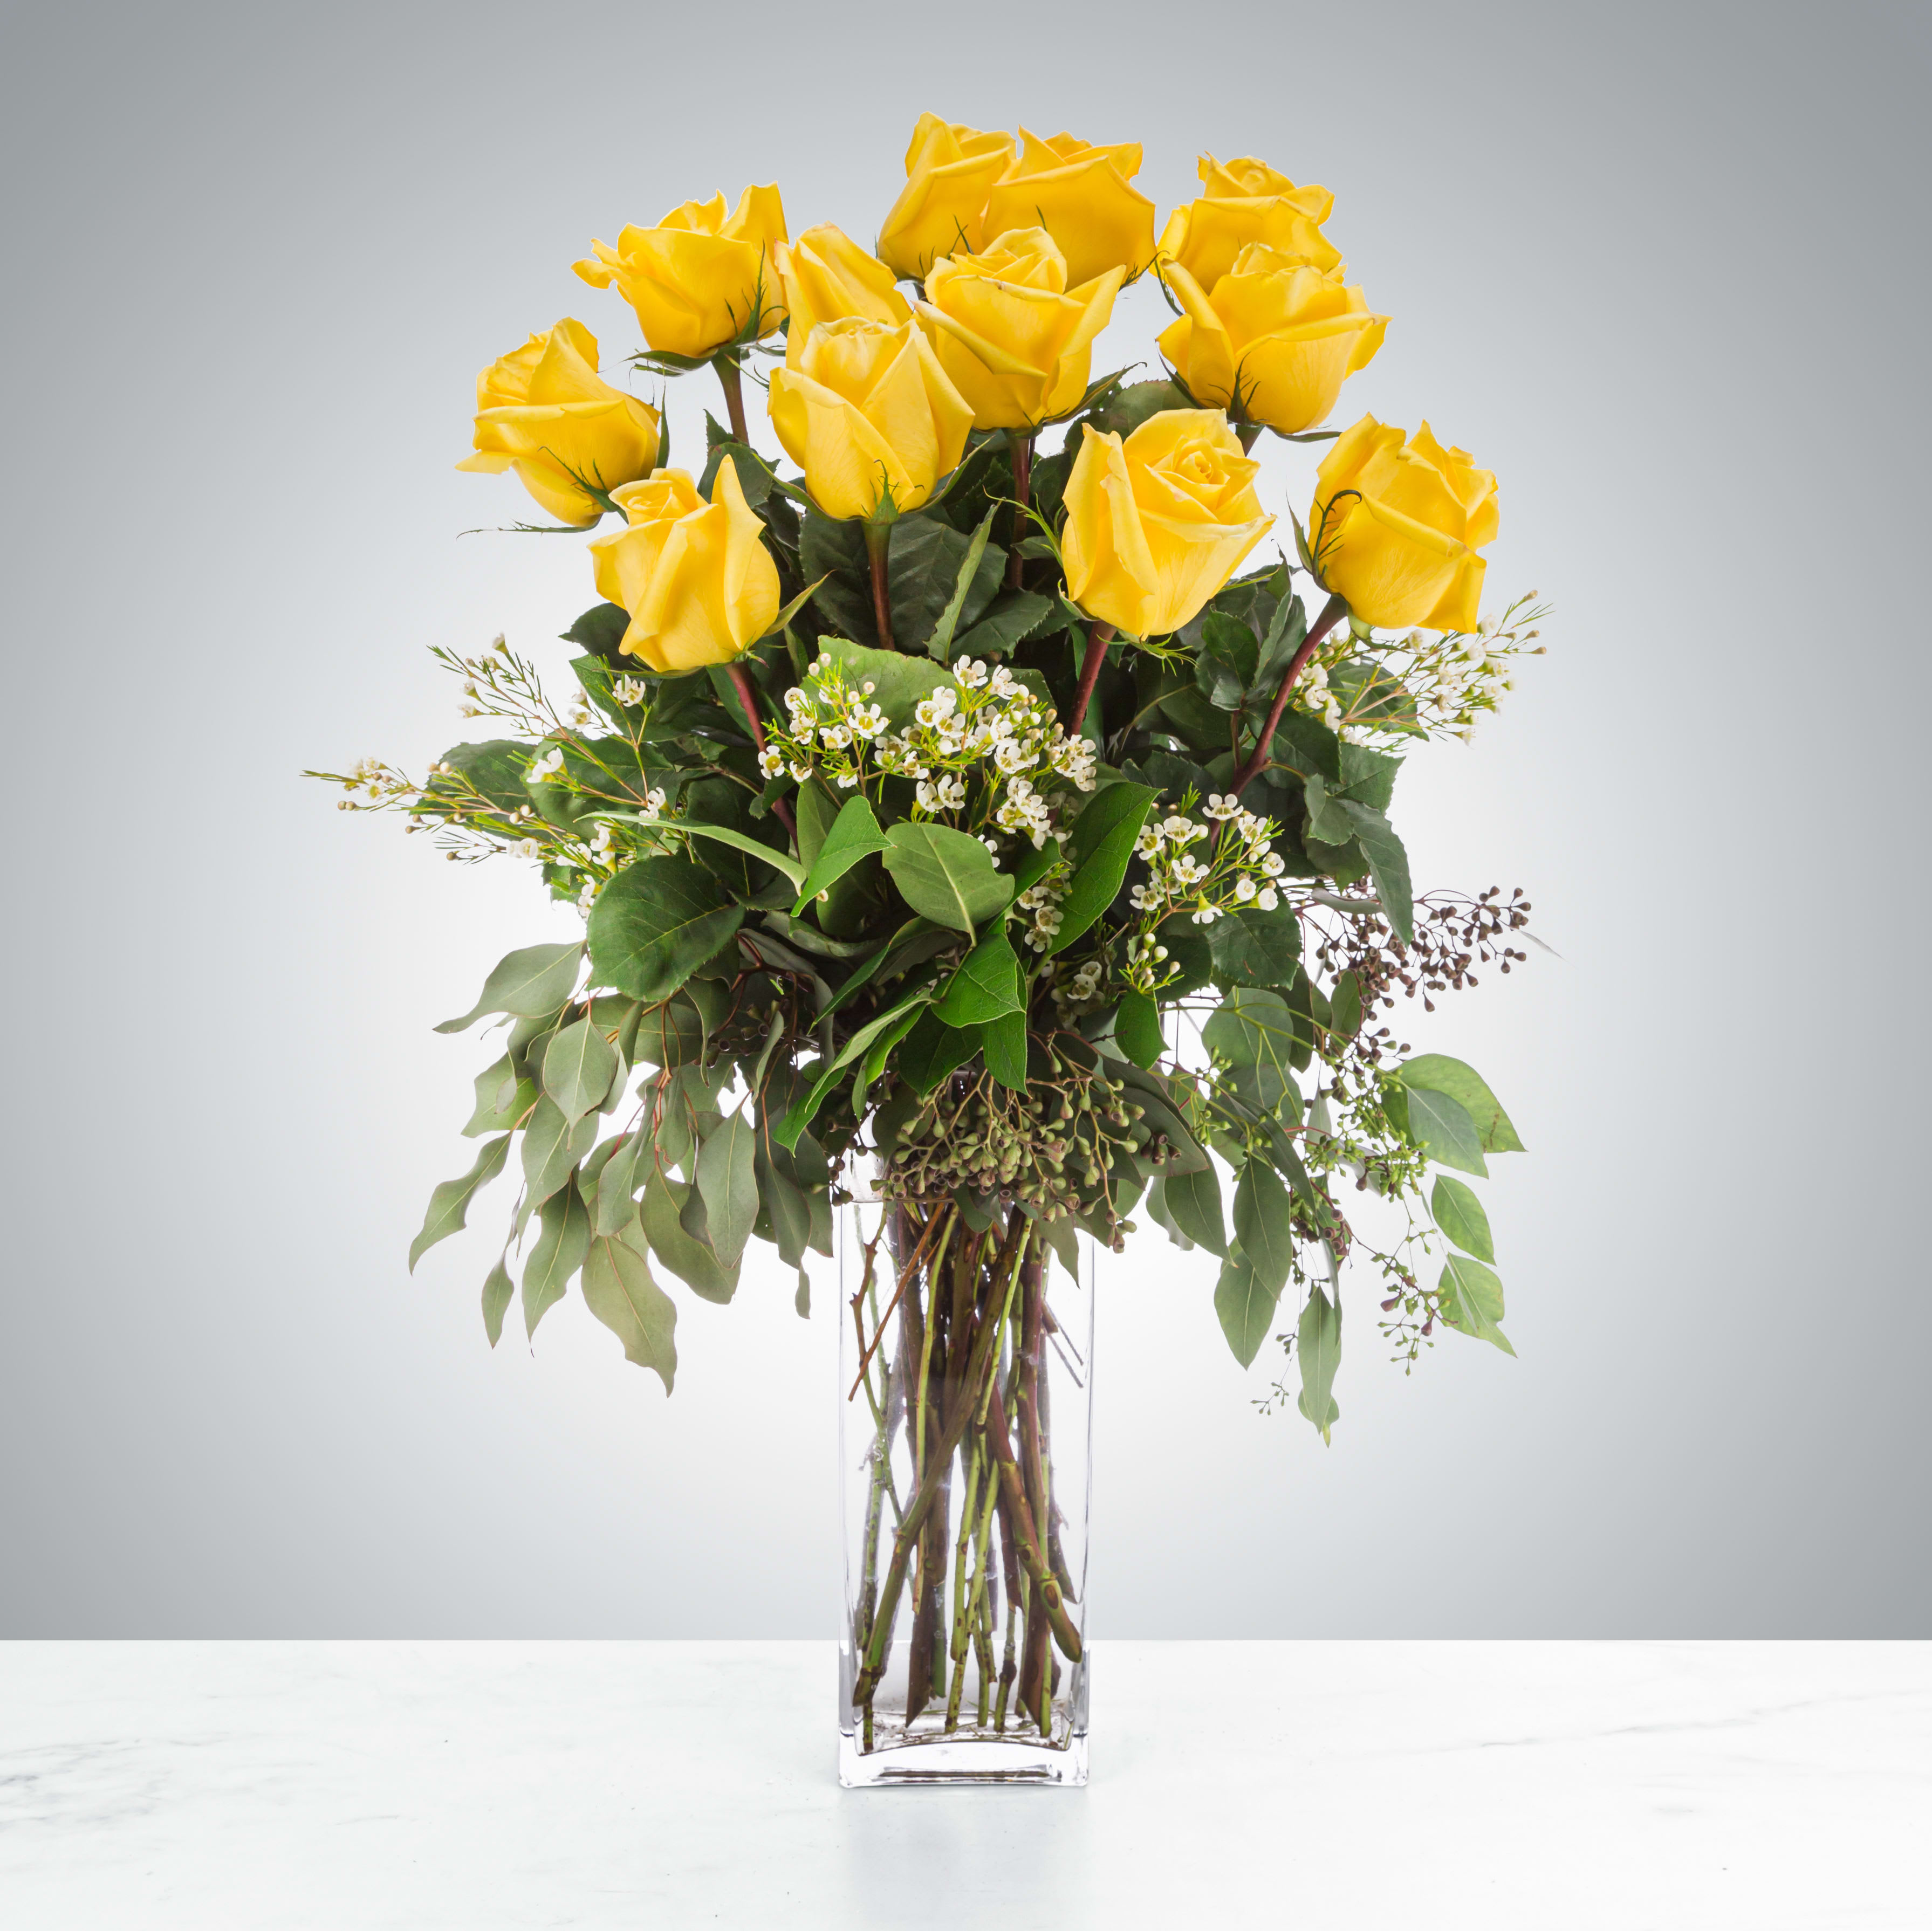 Felicitations by BloomNation™ - Yellow roses are a great option to send a non-romantic love. Send a dozen yellow roses to your friend or family member to brighten up their space and celebrate them! Yellow roses are a good gift for graduations, birthdays, or celebrating an accomplishment like a new job.